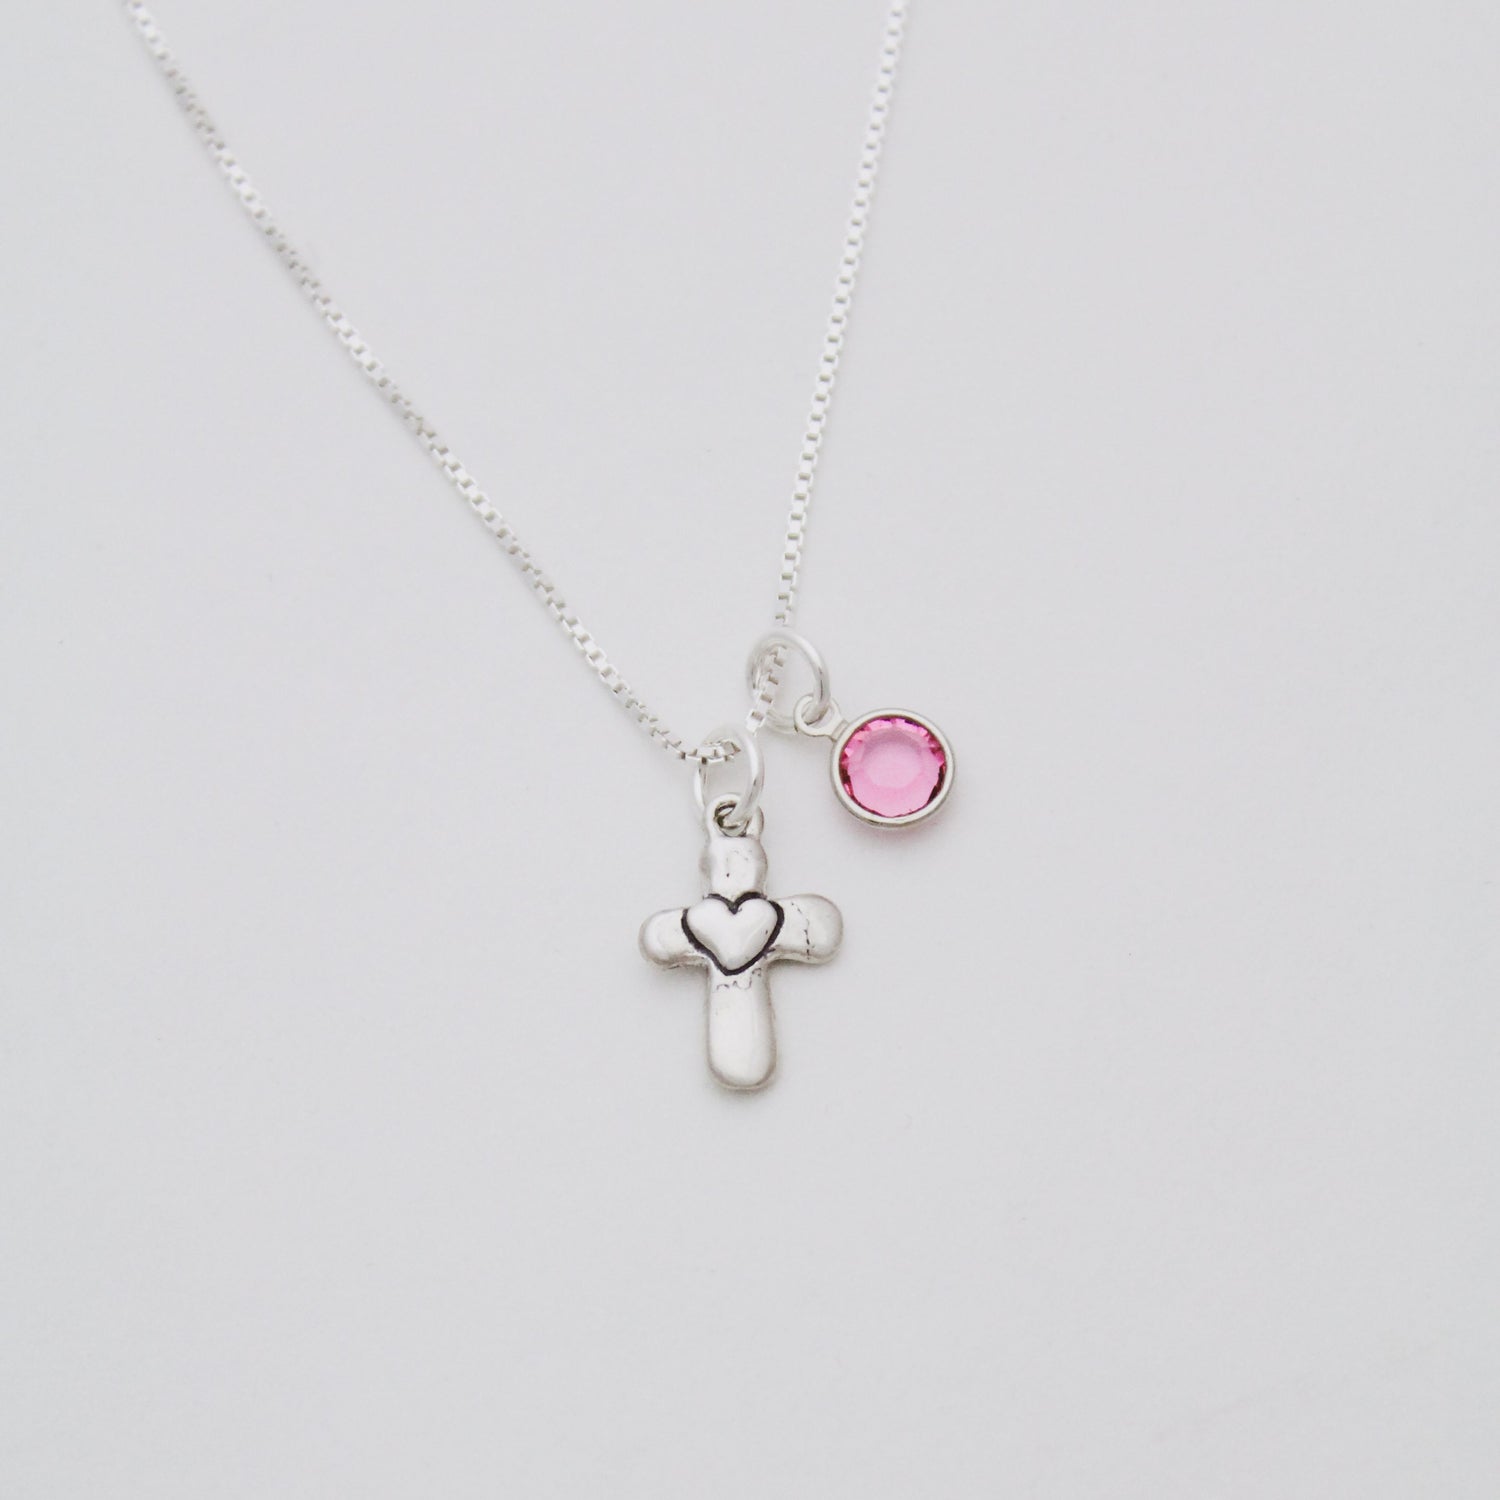 Cross Heart Necklace with Birthstone for Girls - Confirmation Gift - Holy Communion Jewelry - Sterling Silver Cross Necklace - Baptism Gift